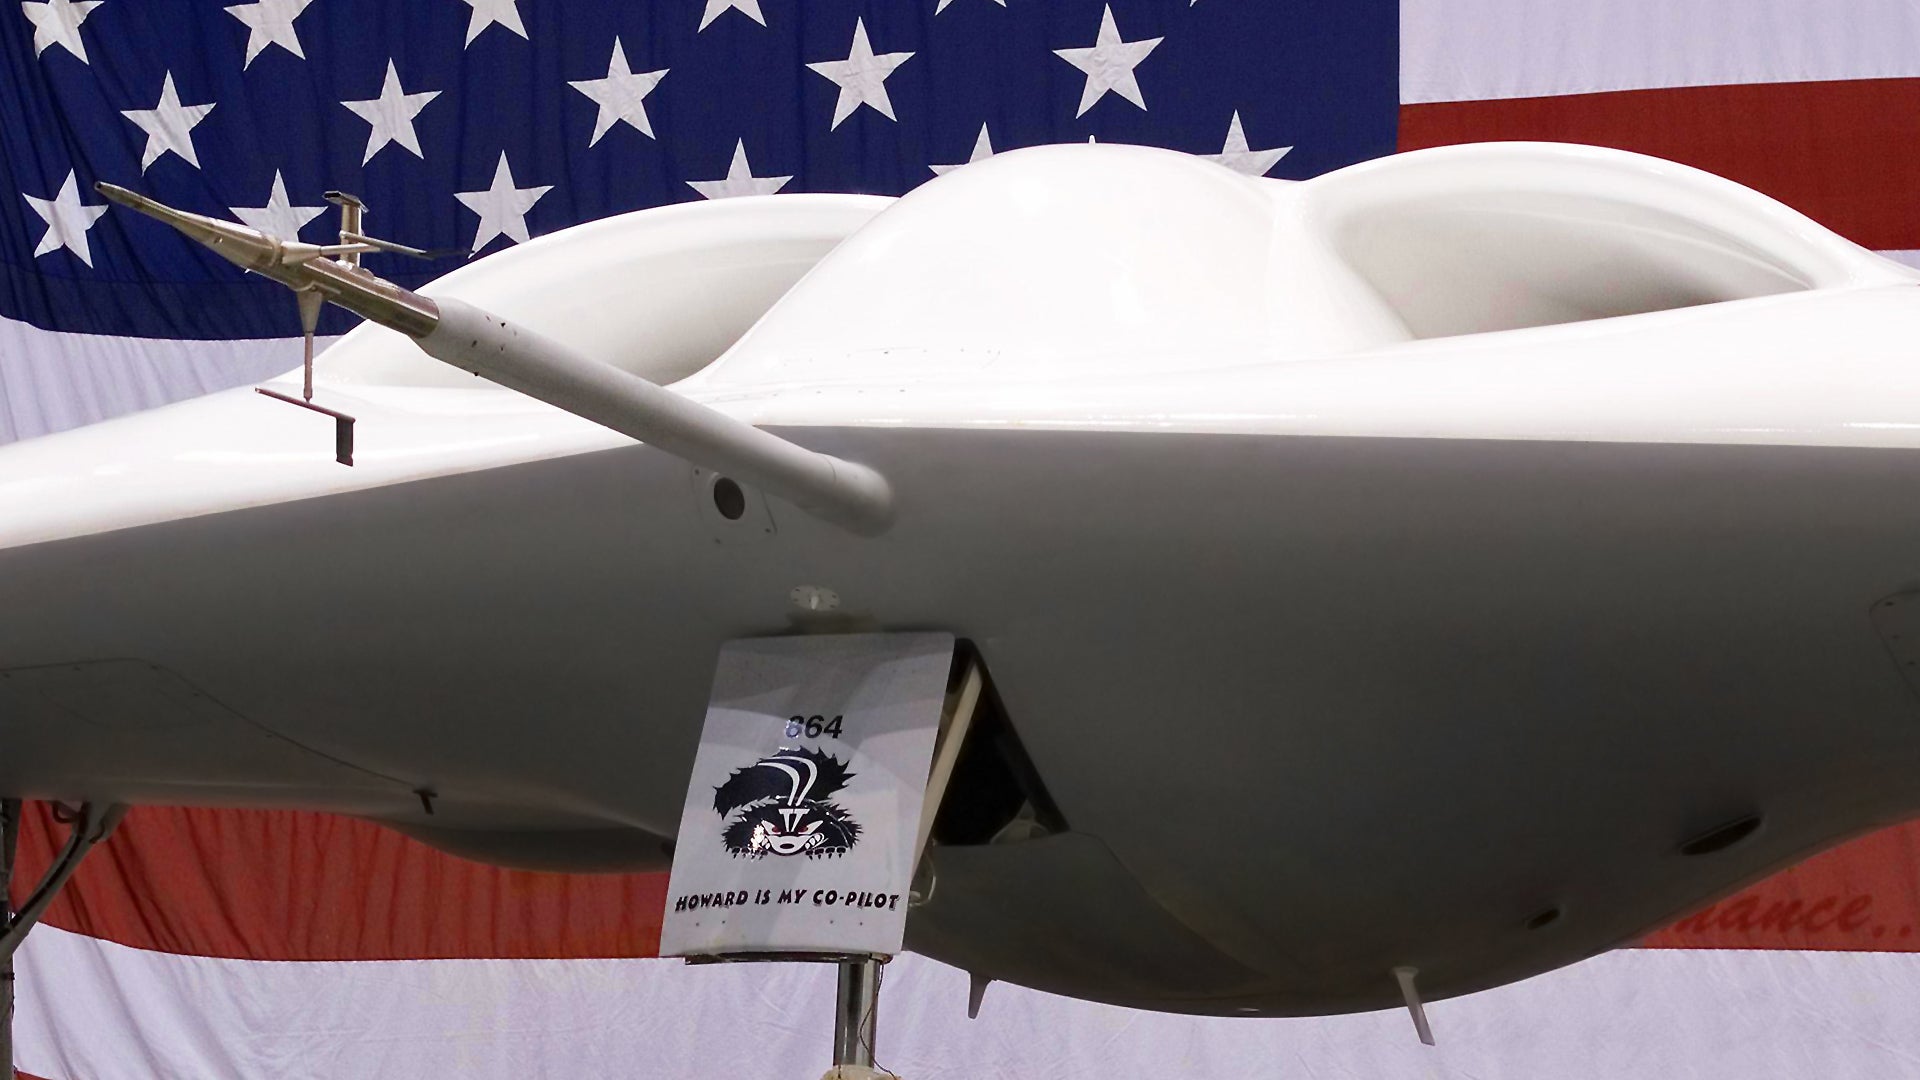 What Drone Will Lockheed Use For Its High-Flying Ballistic Missile Frying Laser Demo?